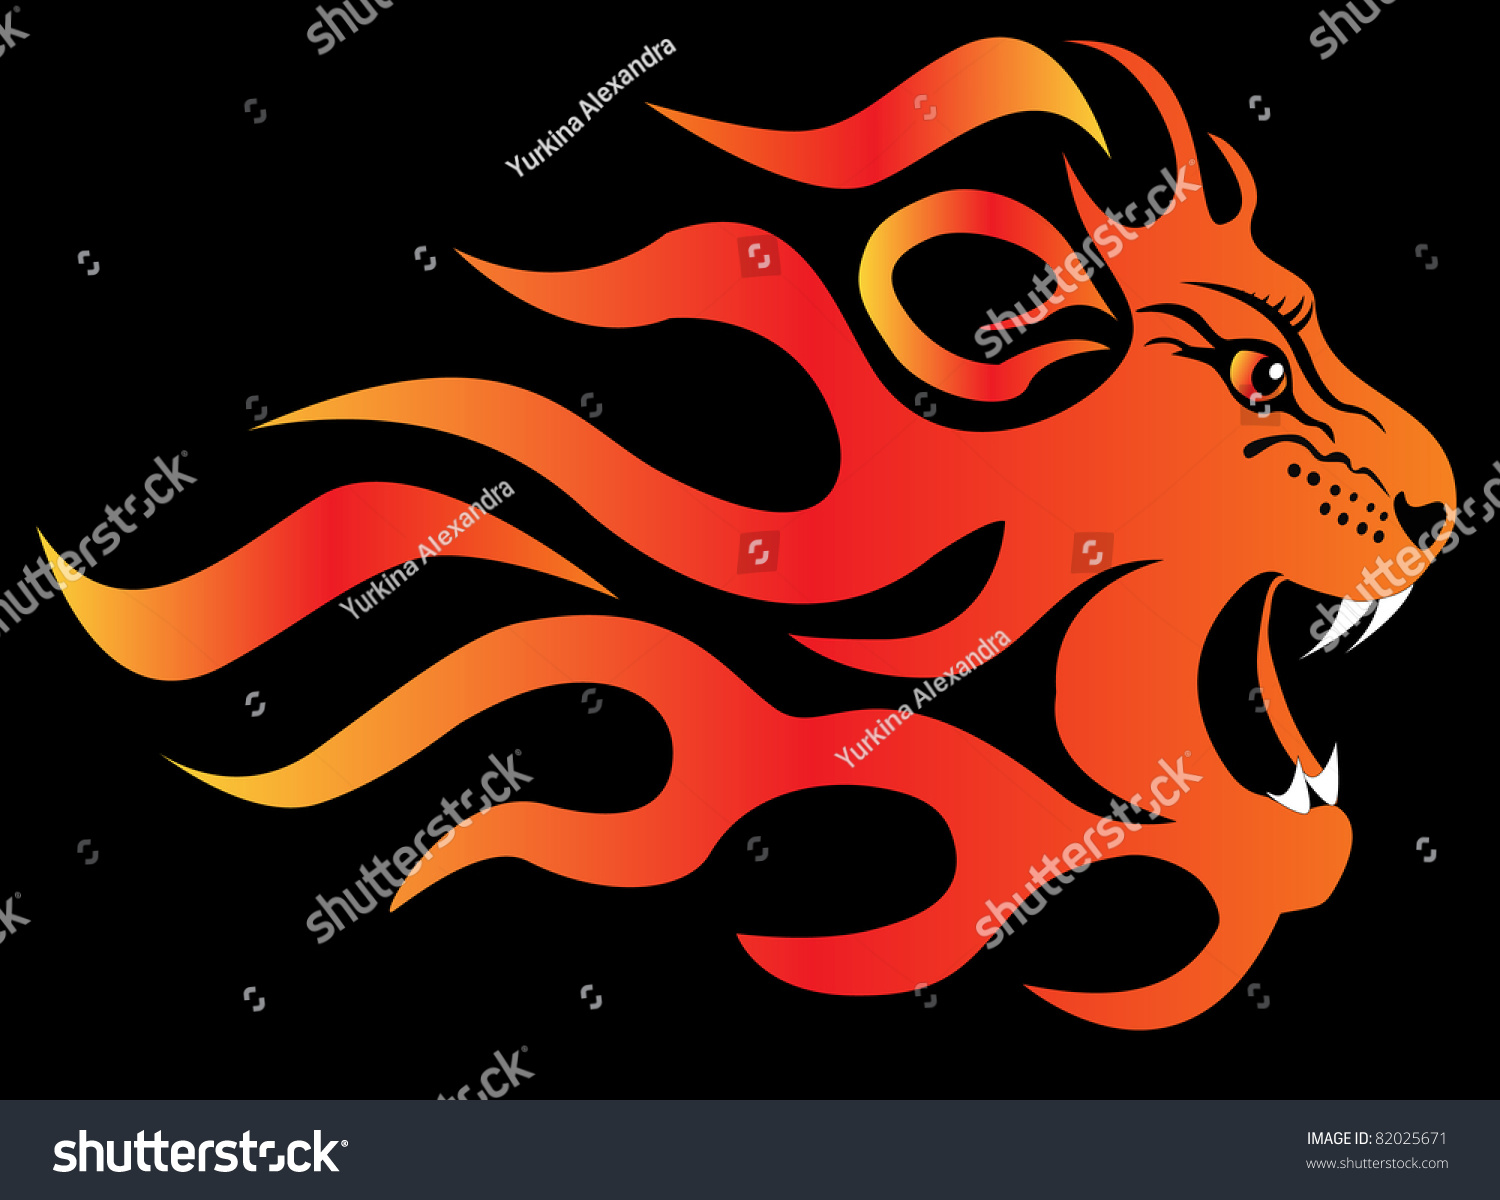 Illustration Infuriated Lion In Fire On Black Background - 82025671 ...